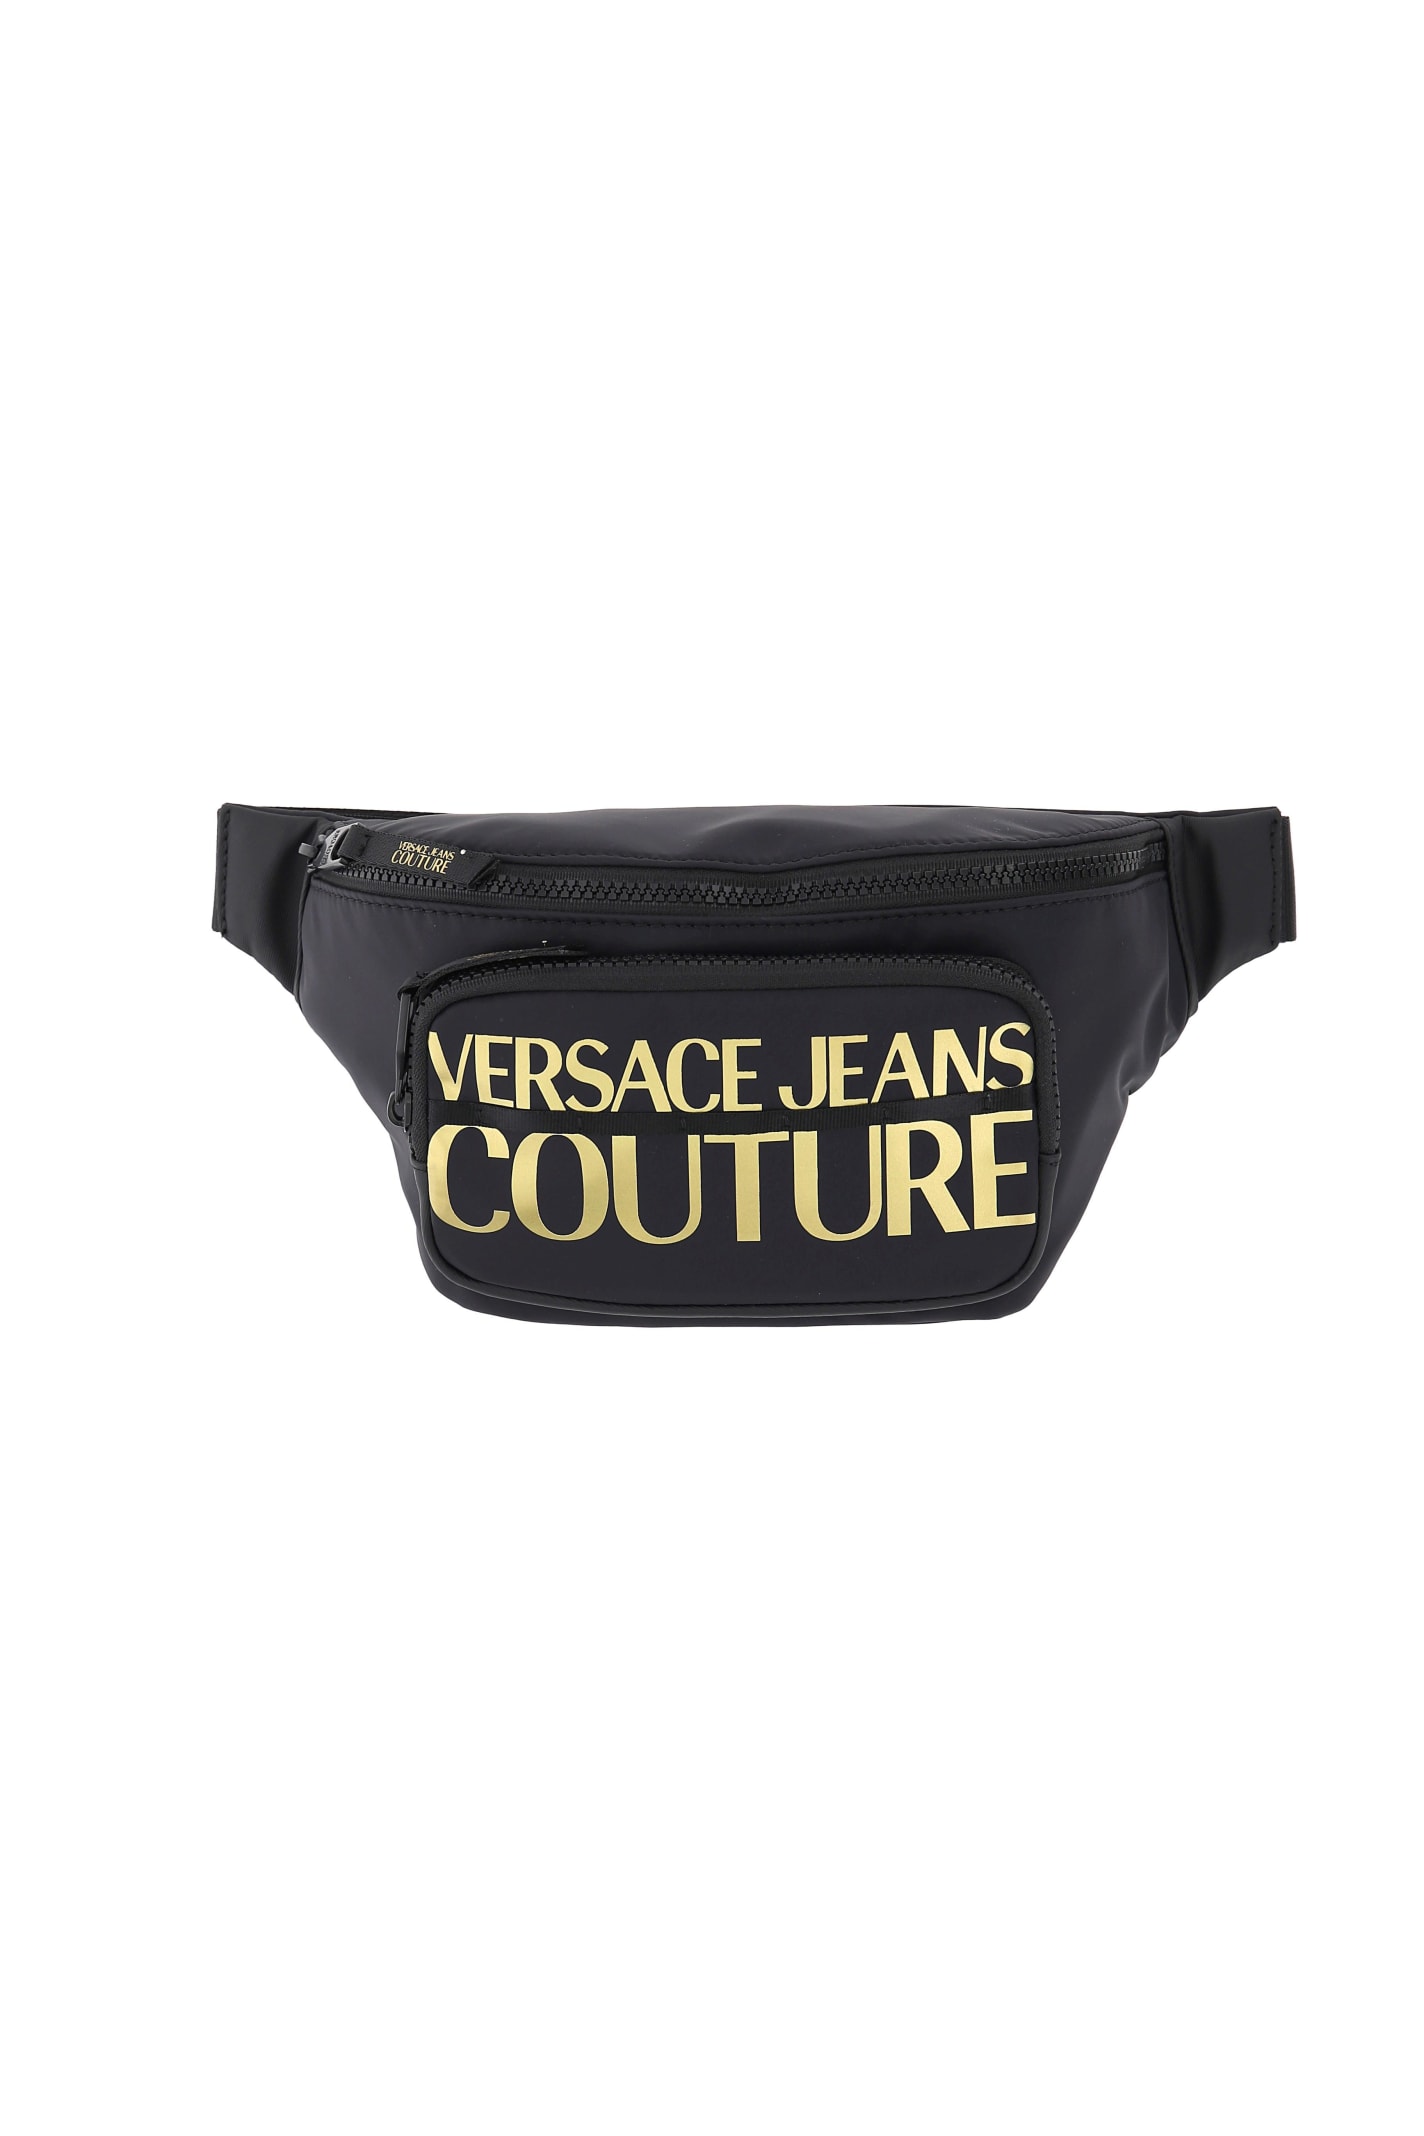 Versace Jeans Couture Bags Range Logo Couture - Sketch 8 Nylon Liscio In Black/gold